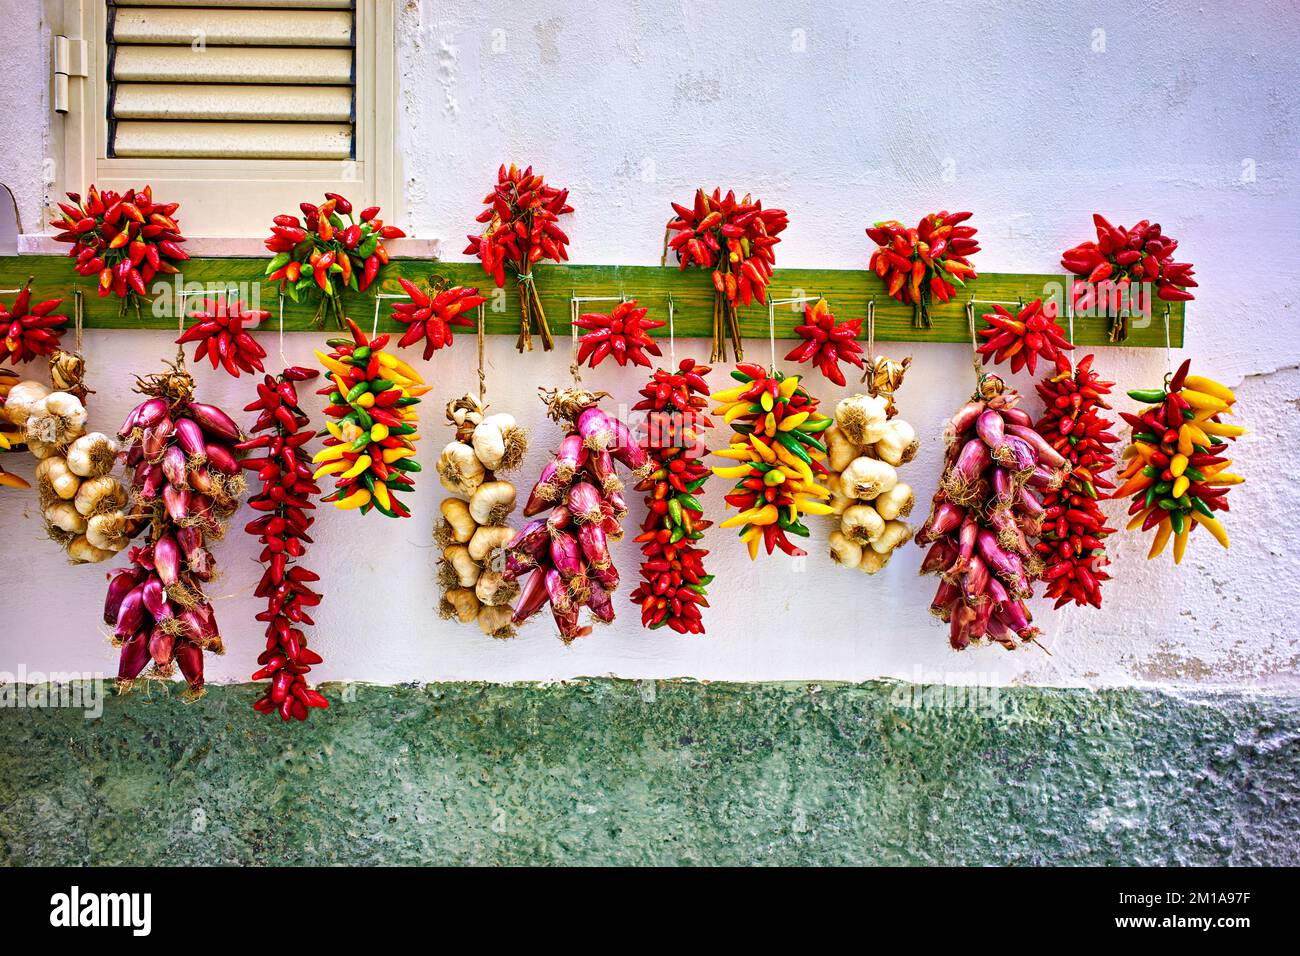 Vieste Gargano. Apulia Puglia Italy. Red chili,shallot and garlic hanged to dry outside a house Stock Photo